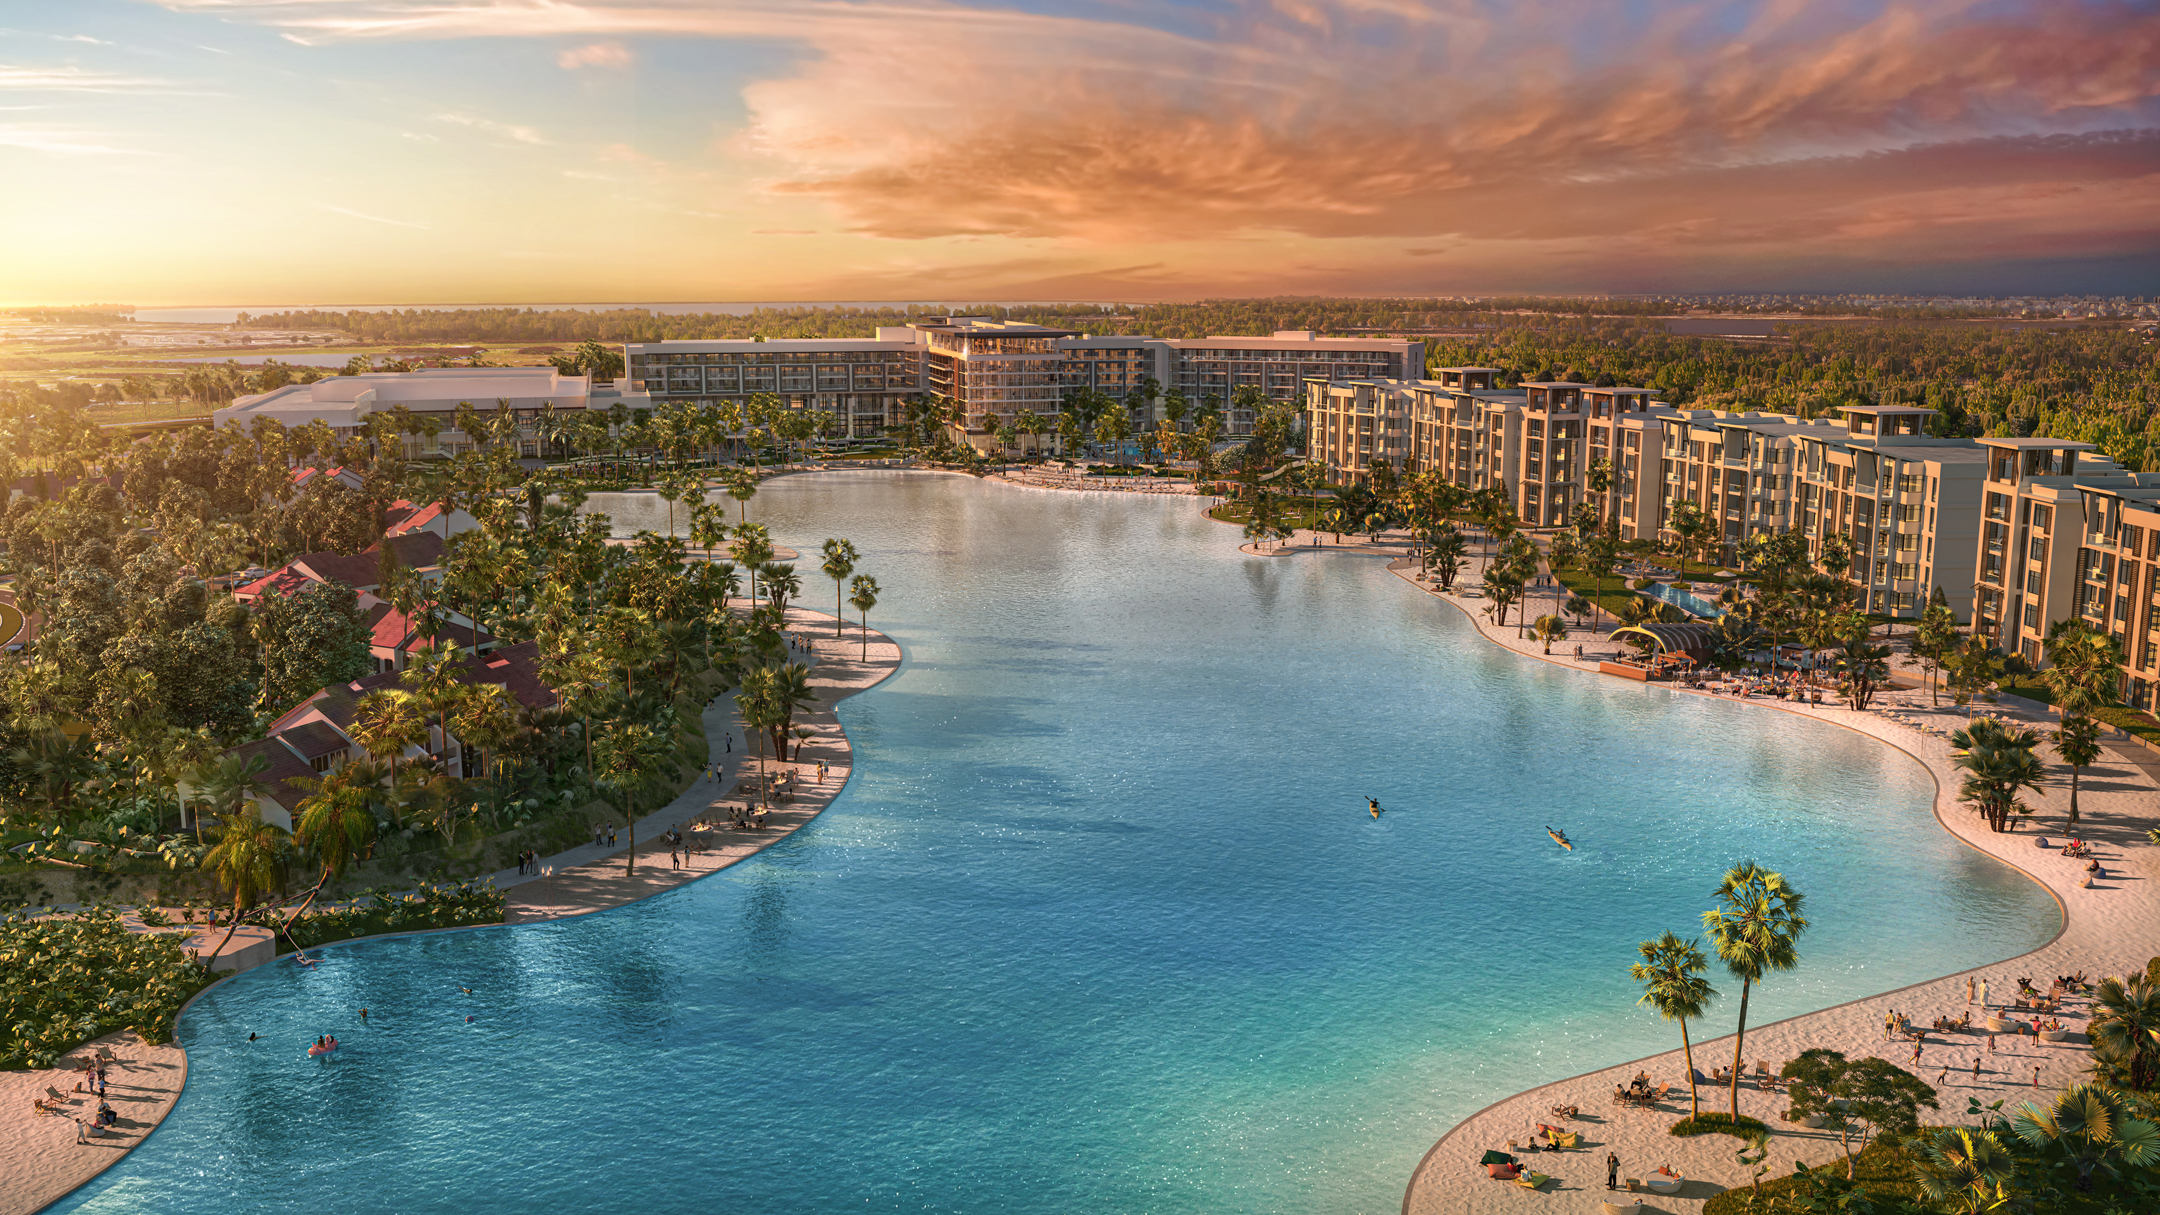 Evermore Orlando Resort and Luxury Conrad Orlando, both bordering Walt Disney World, are now accepting reservations for early 2024